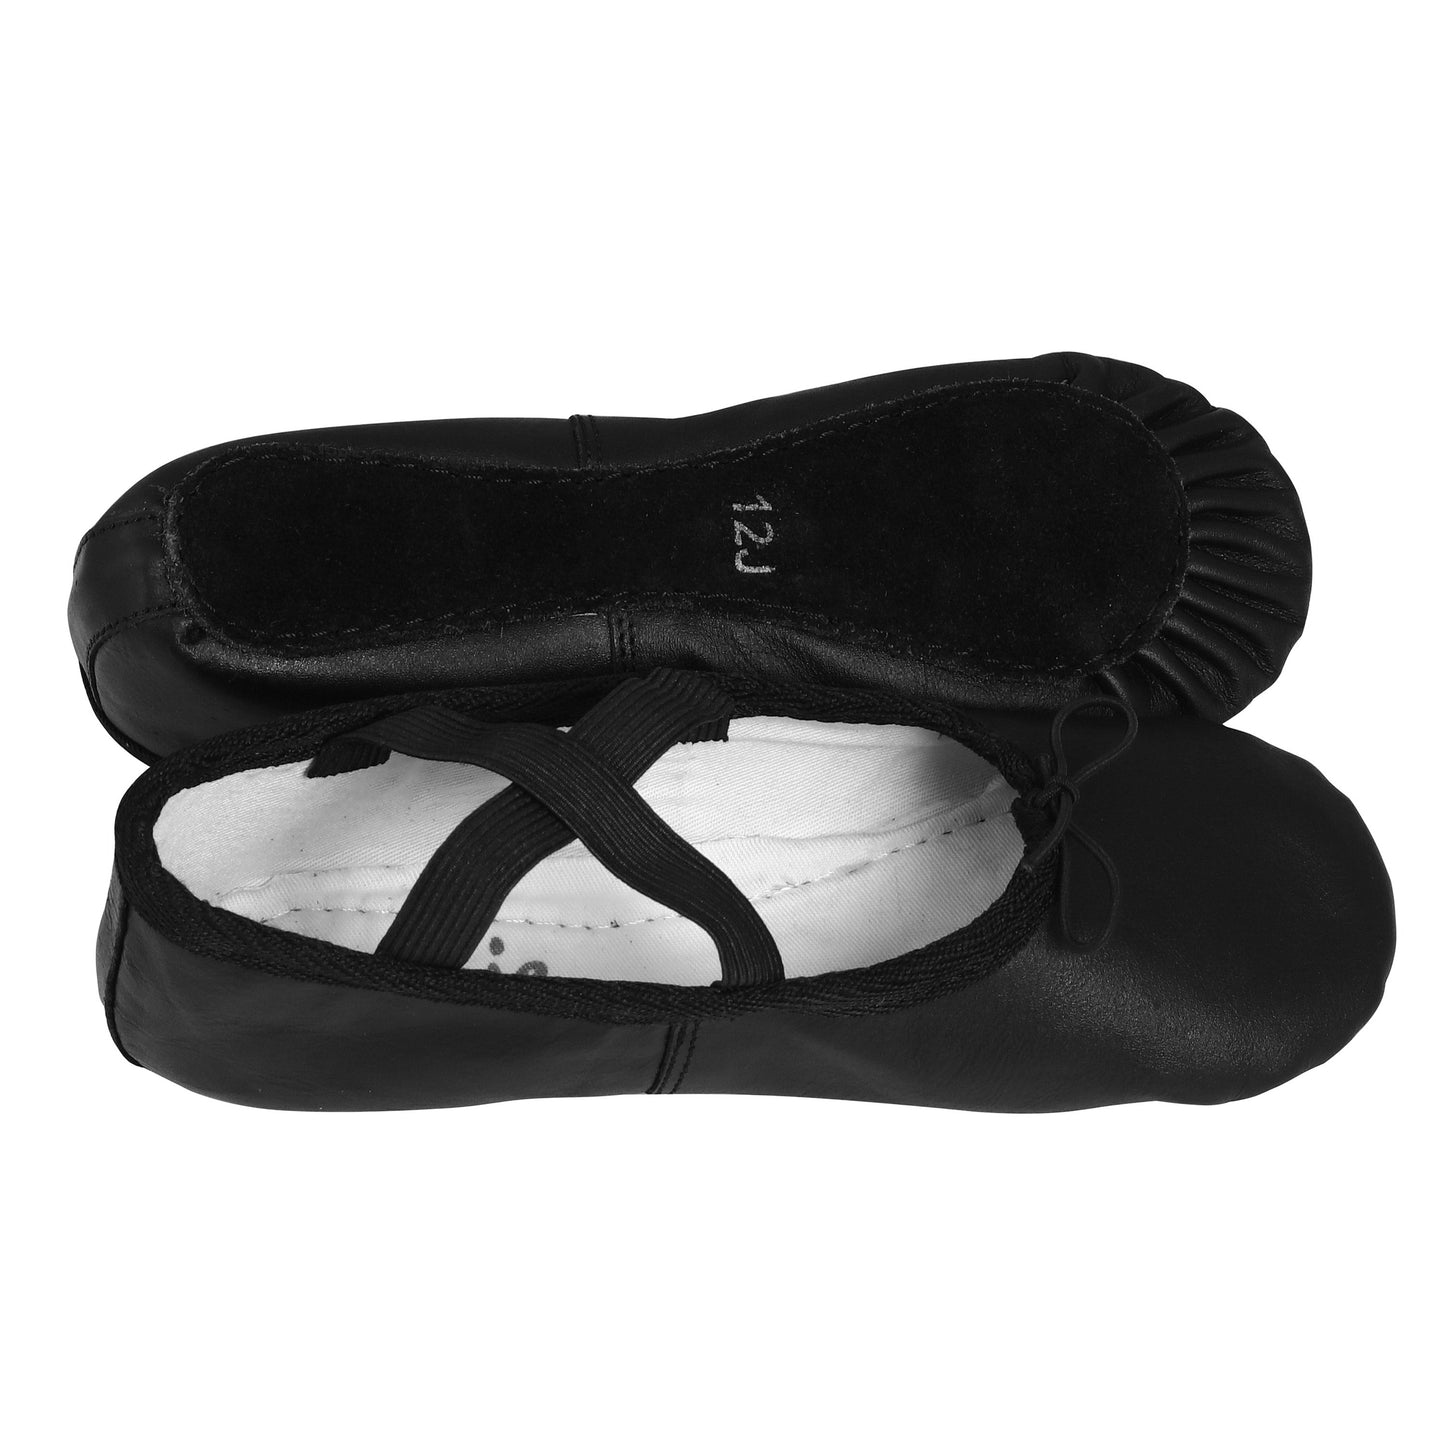 leather ballet shoes